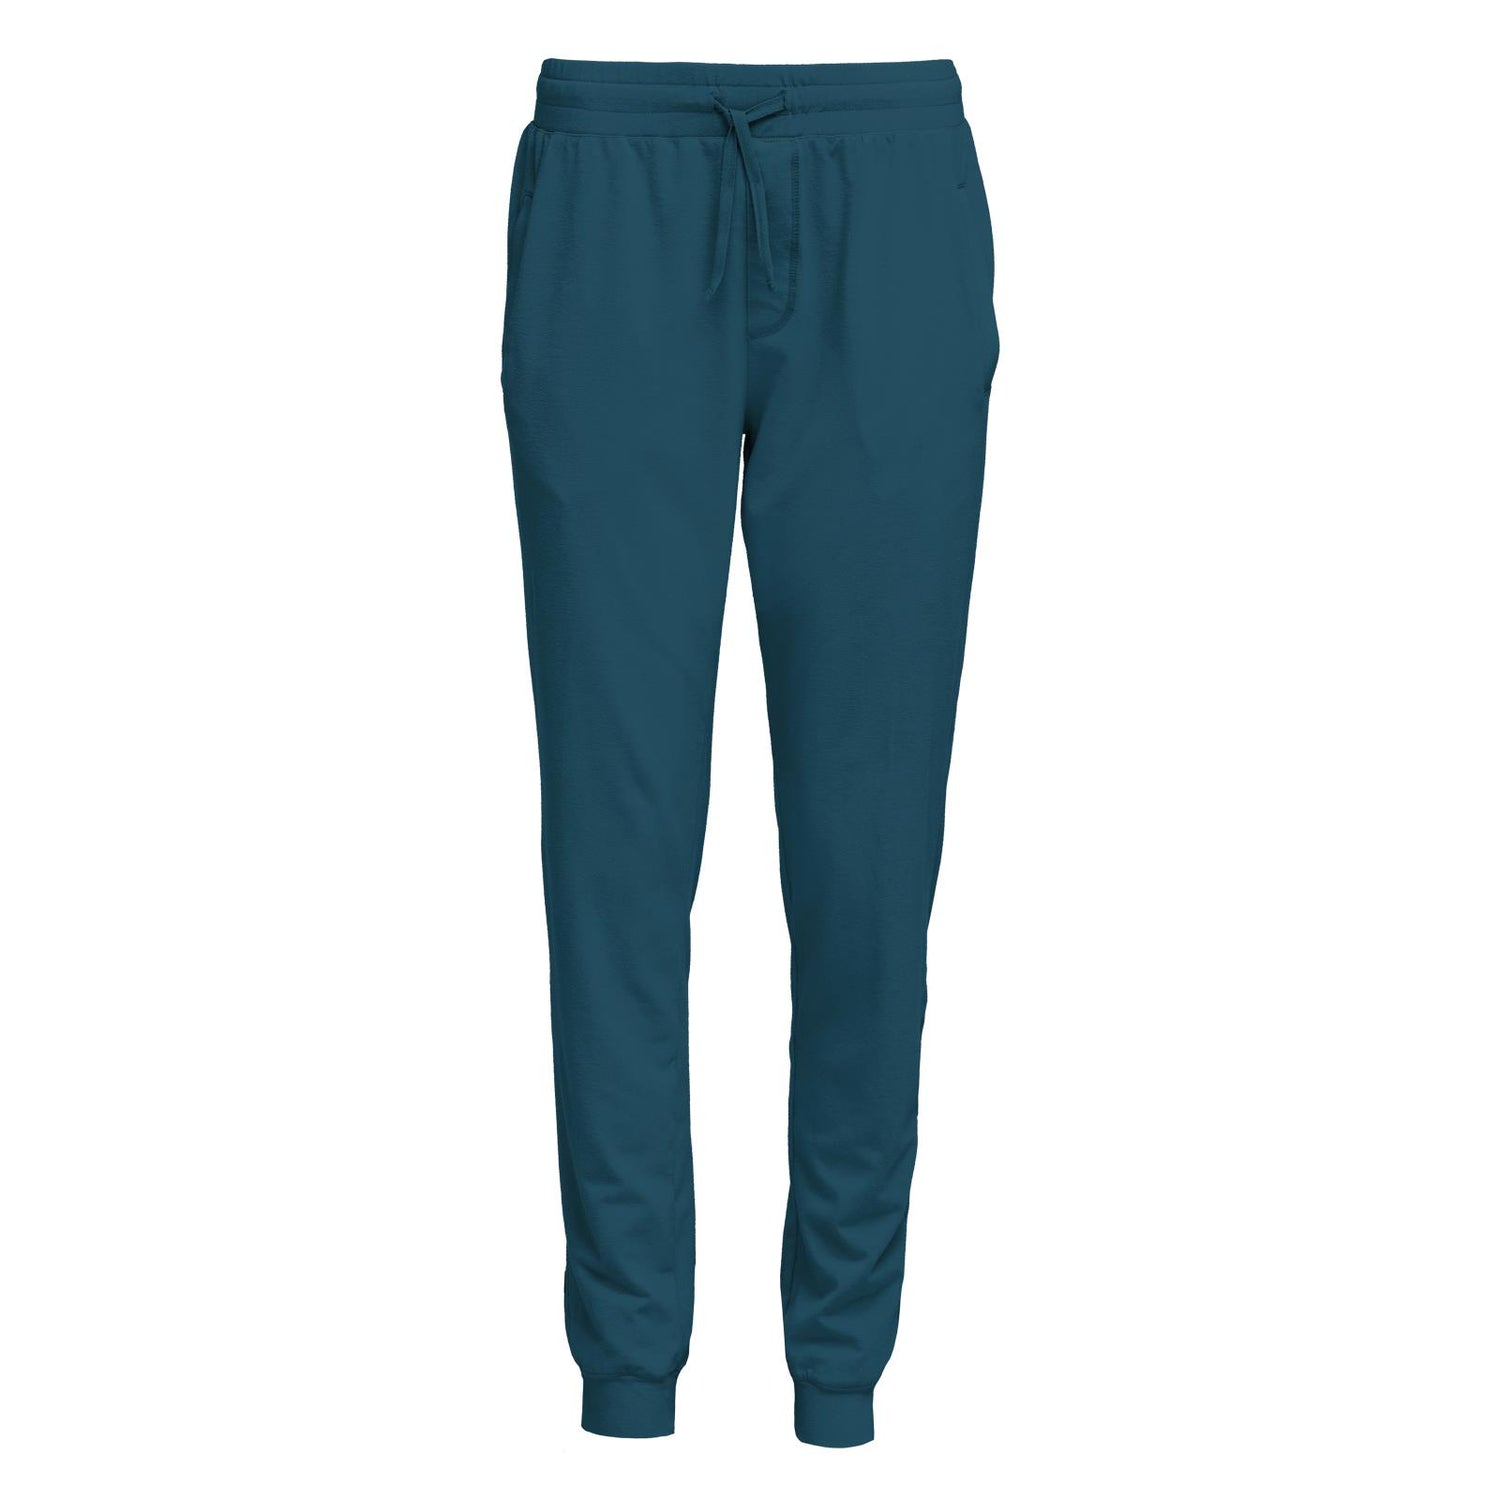 Women's Luxe Athletic Joggers in Peacock